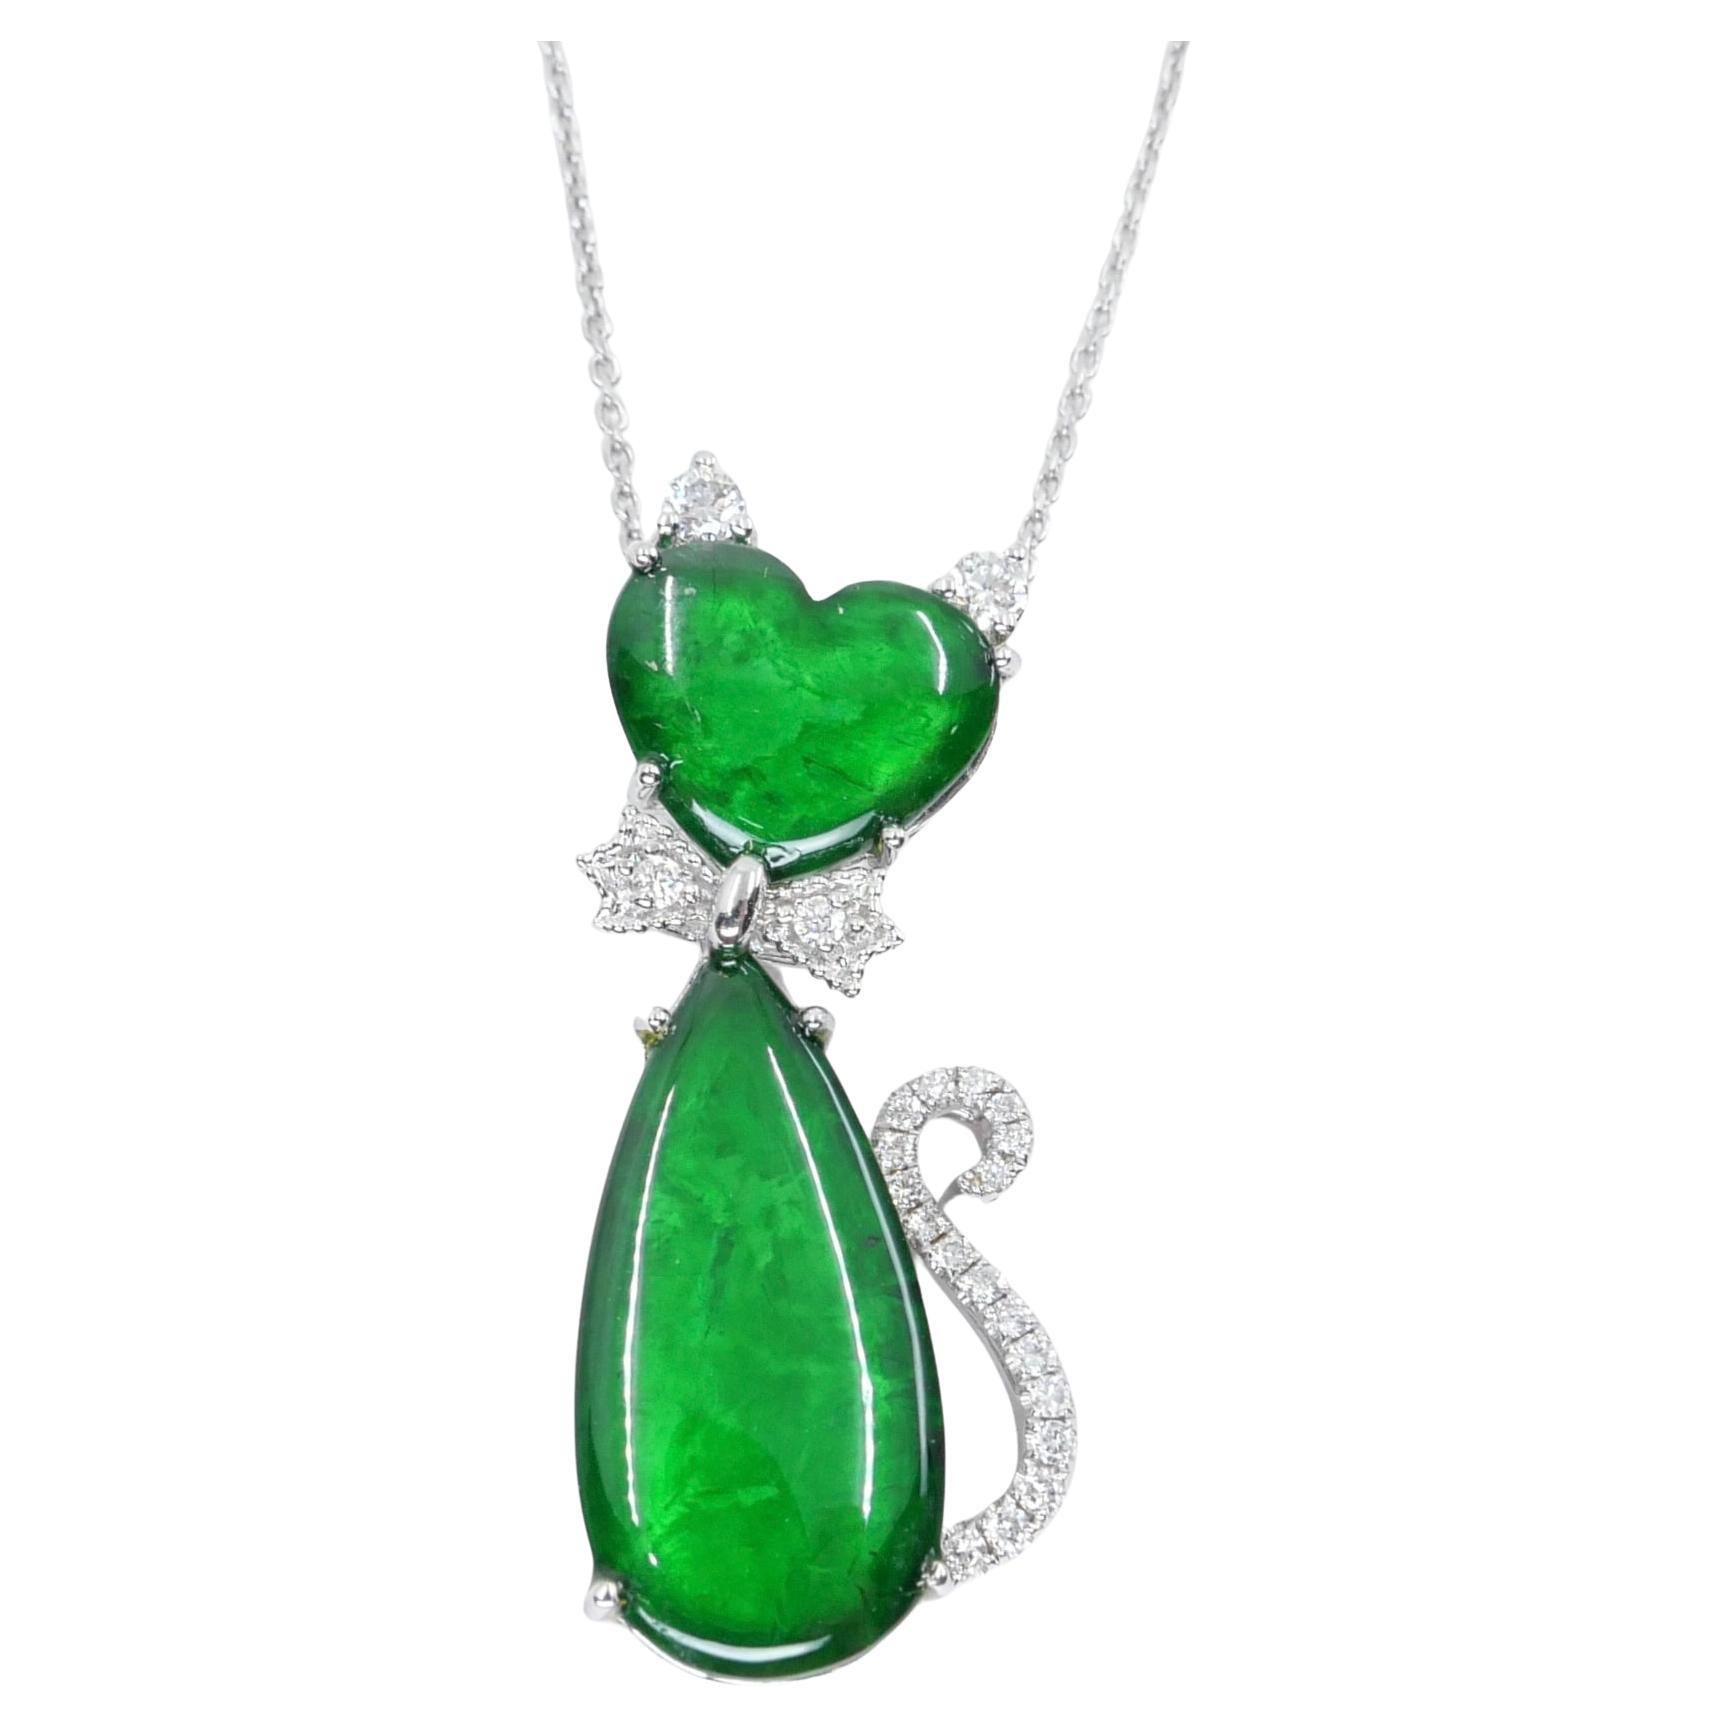 Certified Natural Jade & Diamond Cat Pendant Necklace Glowing Apple Green Color